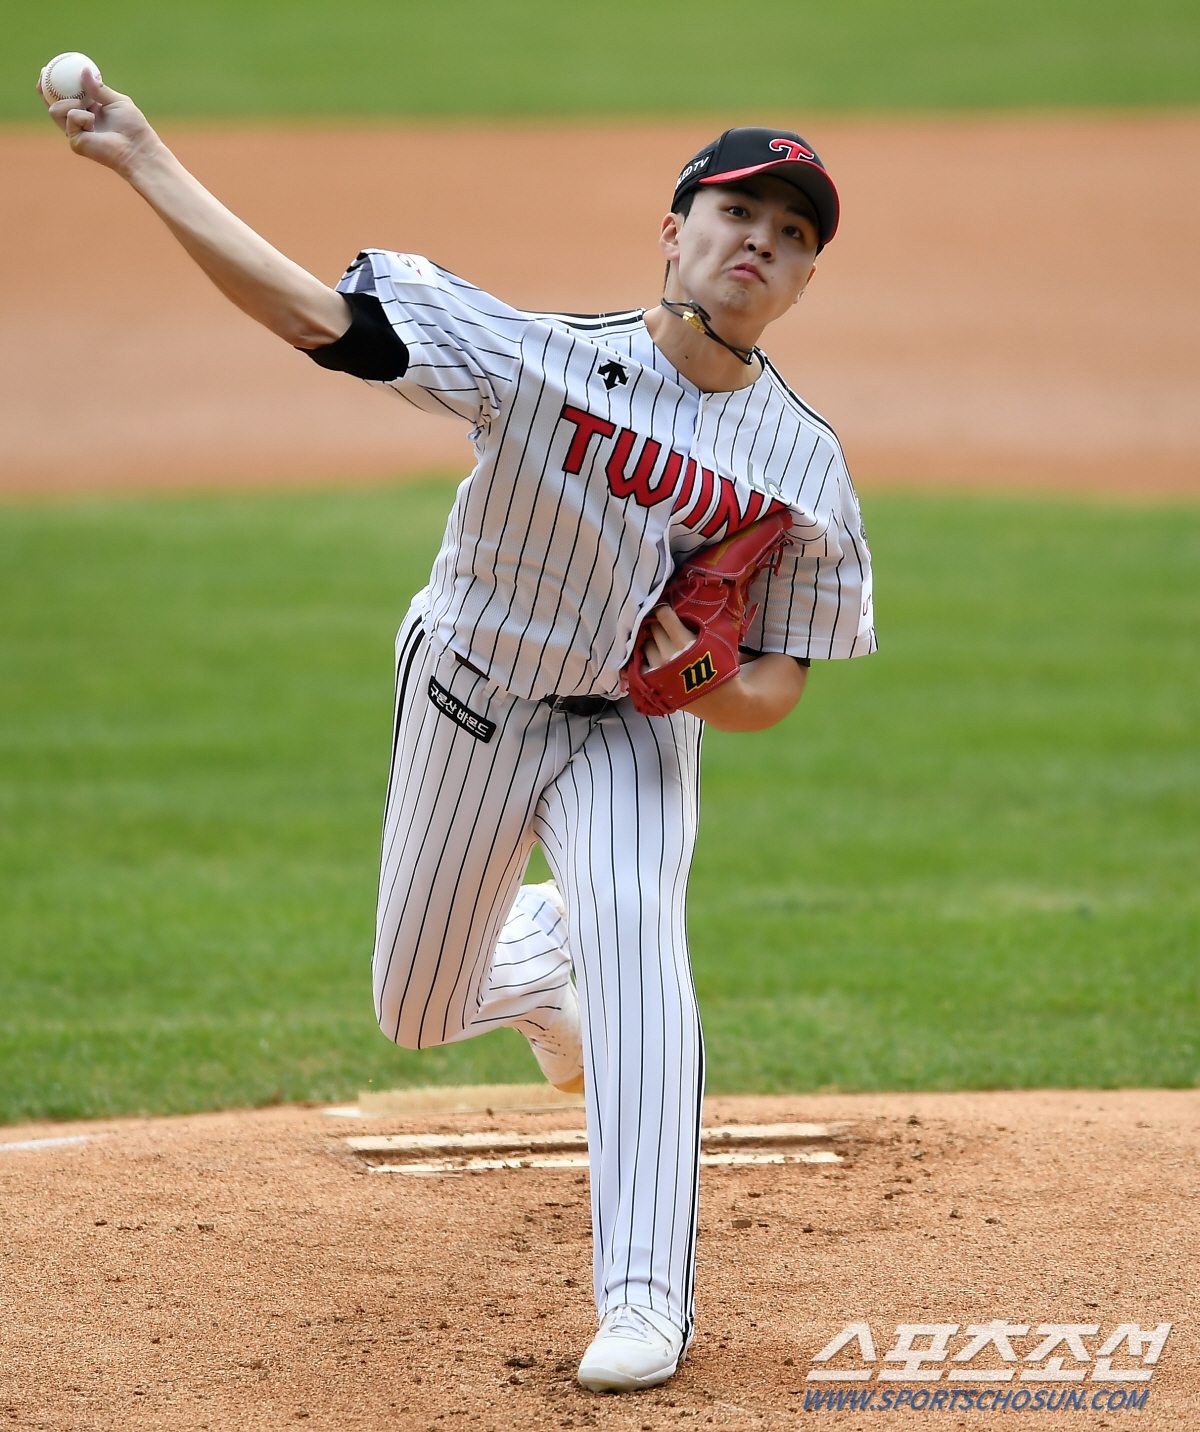 This season, the Rookie of the Year has effectively solidified as the Mini standard of KT Wiz, but the chance has come for LG Twins Lee Min-ho to make sure baseball fans know their true value.Lee Min-ho will start in the first leg of the semi-playoff against the Doosan Bears at Jamsil-dong Stadium on the 4th.It is the first time in 30 years that LGs high school graduates will start the postseason.Top Model on the record: If Lee Min-ho becomes the winner Pitcher, he will become the third high school graduate to win the first postseason start.The first start of the postseason for a high school graduate is only two times in professional baseball history.The first protagonist was the Jongseok Yeom of the Lotte Mart Giants.Jongseok Yeom, who finished third in the series with 17 wins in 1992 and ranked first in the Earned run average (2.33), won the first round of the semi-playoff against the Samsung Lions.He gave up just five hits in nine innings and shut down the Samsung Lions batting line with no runs; it is the only record in history that a high school graduate has completed his first postseason start.The second was Pitcher of the Empty Kim Myung-je.Kim Myung-jae, who was the best prospect in 2005 with a down payment of 600 million won, recorded 7 wins and 6 losses and Earned run average 4.63 in the 2012 Korea Professional Baseball season.And he played his postseason debut game in the third playoff game against the Hanhwa Eagles that year.Kim Myung-jae, who came out as a starter to finish the second consecutive victory at the time, had more than expected four hits and no runs in five innings.Doosan won 1-0, Kim Myung-jae became the winner, and became the second protagonist to win the first PS start.Narora is a glorious record that even high school graduates Pitchers did not get.Ryu Hyun-jin, who swept the rookie and MVP in the 2006 Earned run average - strikeout king, came out as the first starter in the second game of the semi-playoff against the KIA Tigers, but fell to the ground with five hits and three walks in 523 innings.There are many baseball fans who remember that Kwang-hyun Kim won his first start in the Korean series in 2007, and Kwang-hyun Kim became the winner of the game.In the first game, he played PS debut as a relief pitcher and started in the fourth game.Lee Min-ho has come out in 20 games this season, winning 4-4 and hitting Earned run average 3.69.The bold pitching that pierced the body of the opponent with a confident figure was hard to see as a high school graduate.